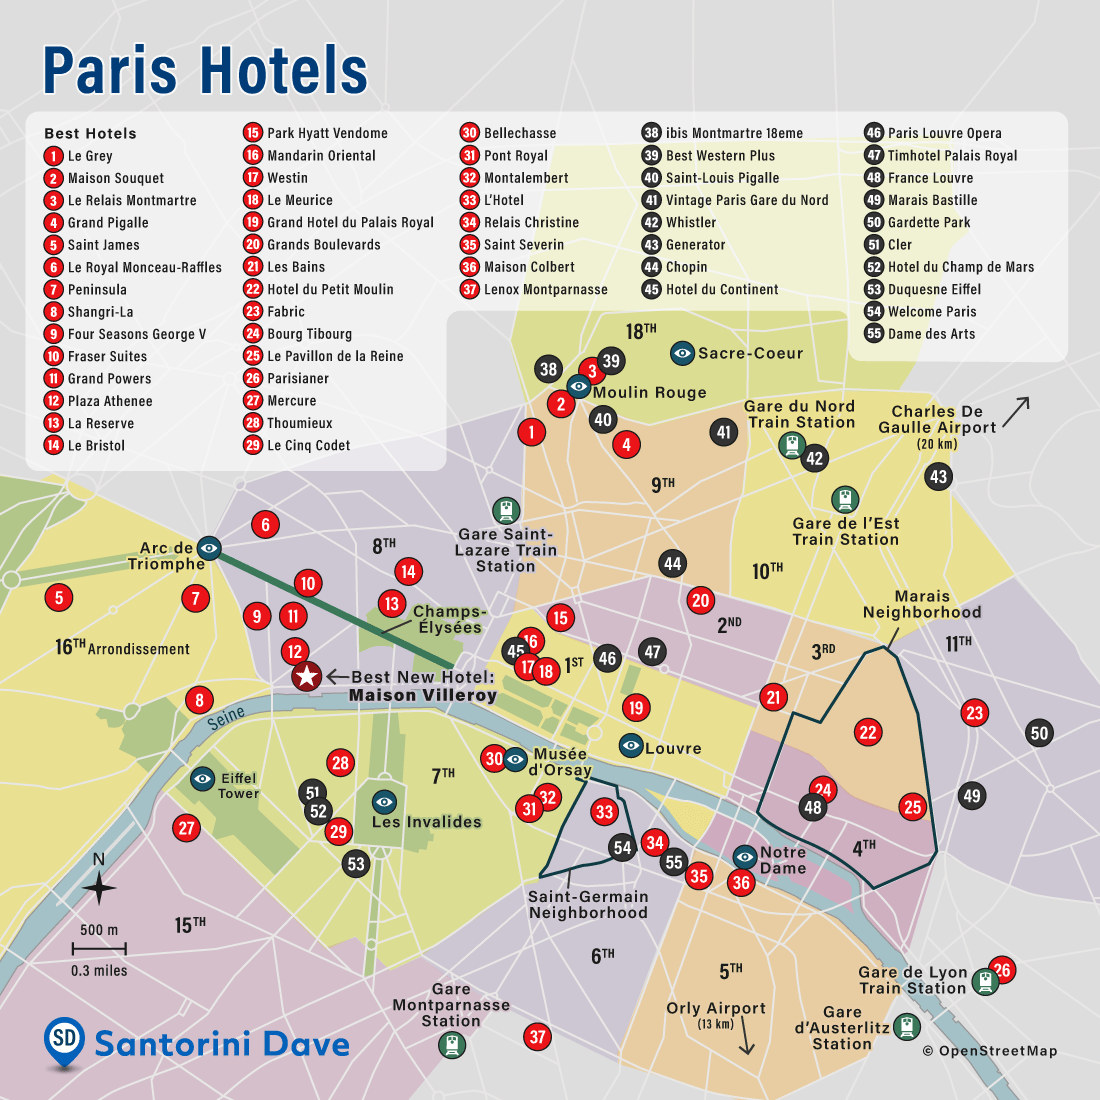 Map of luxury, affordable, and best new hotels in Paris